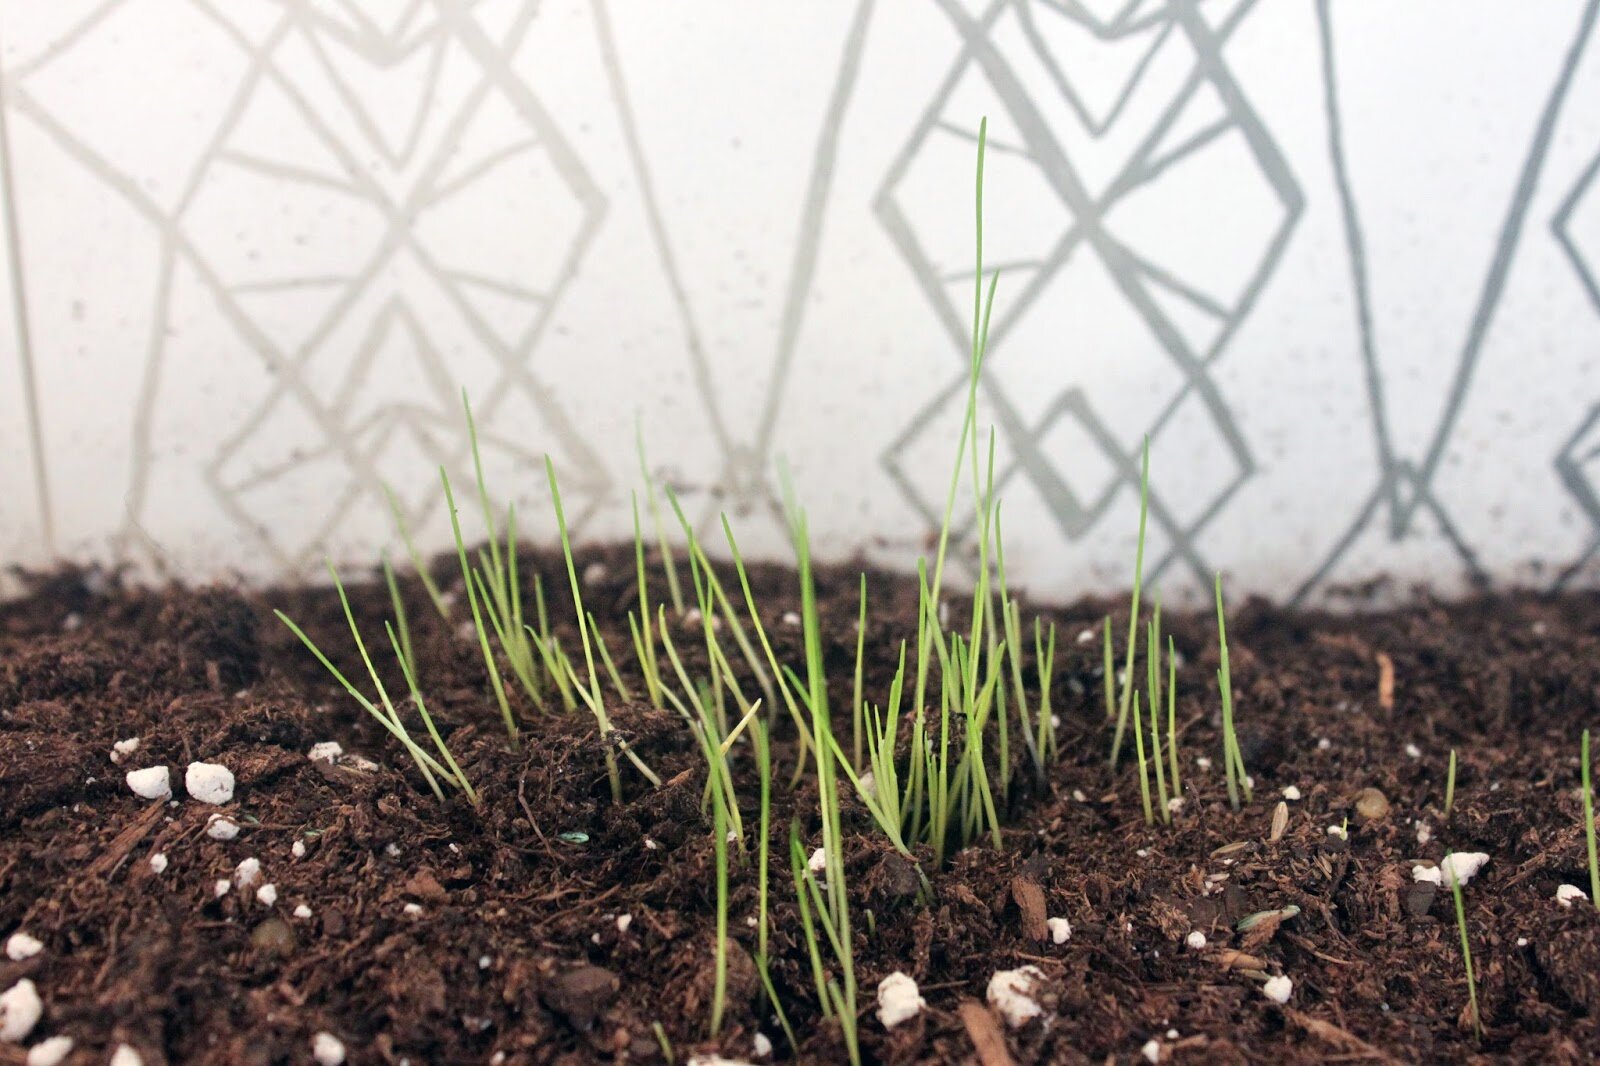   Untitled (Mantle Grass)  (potting soil, grass seed) 2015 